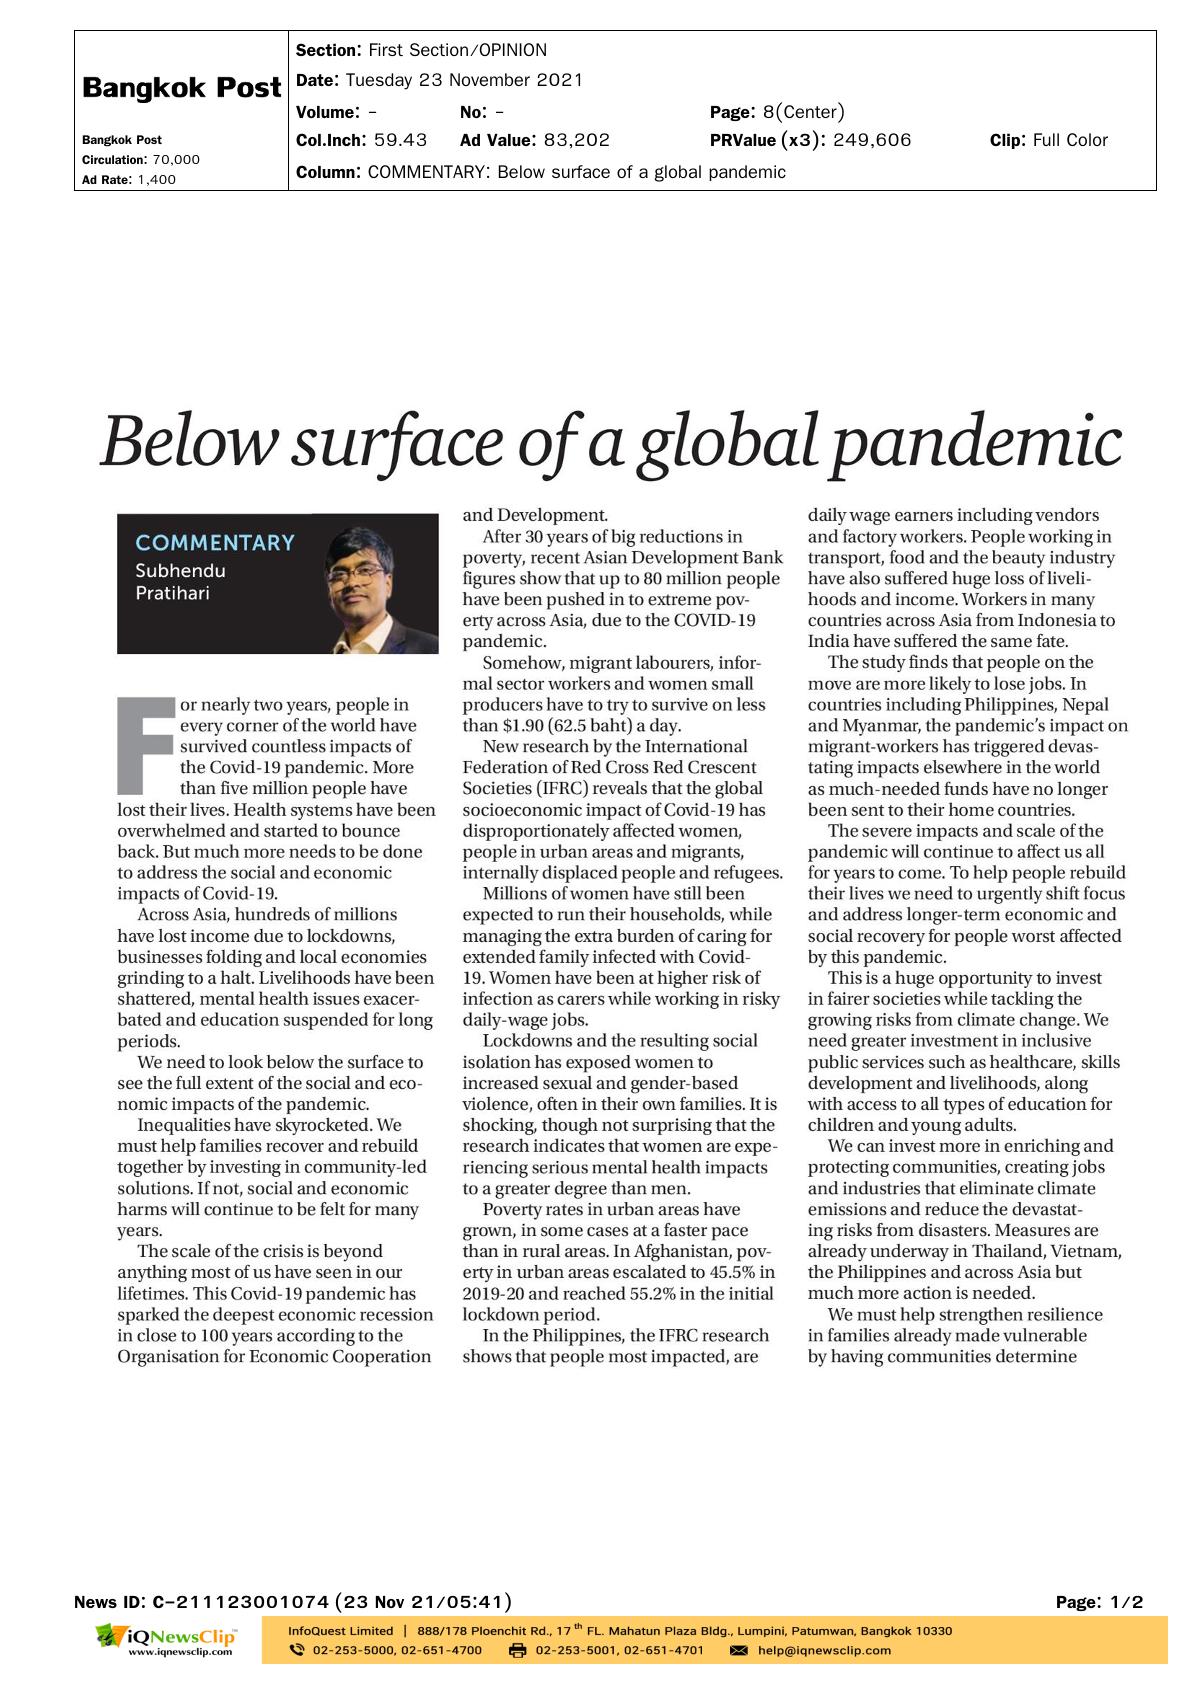 Below surface of a global pandemic